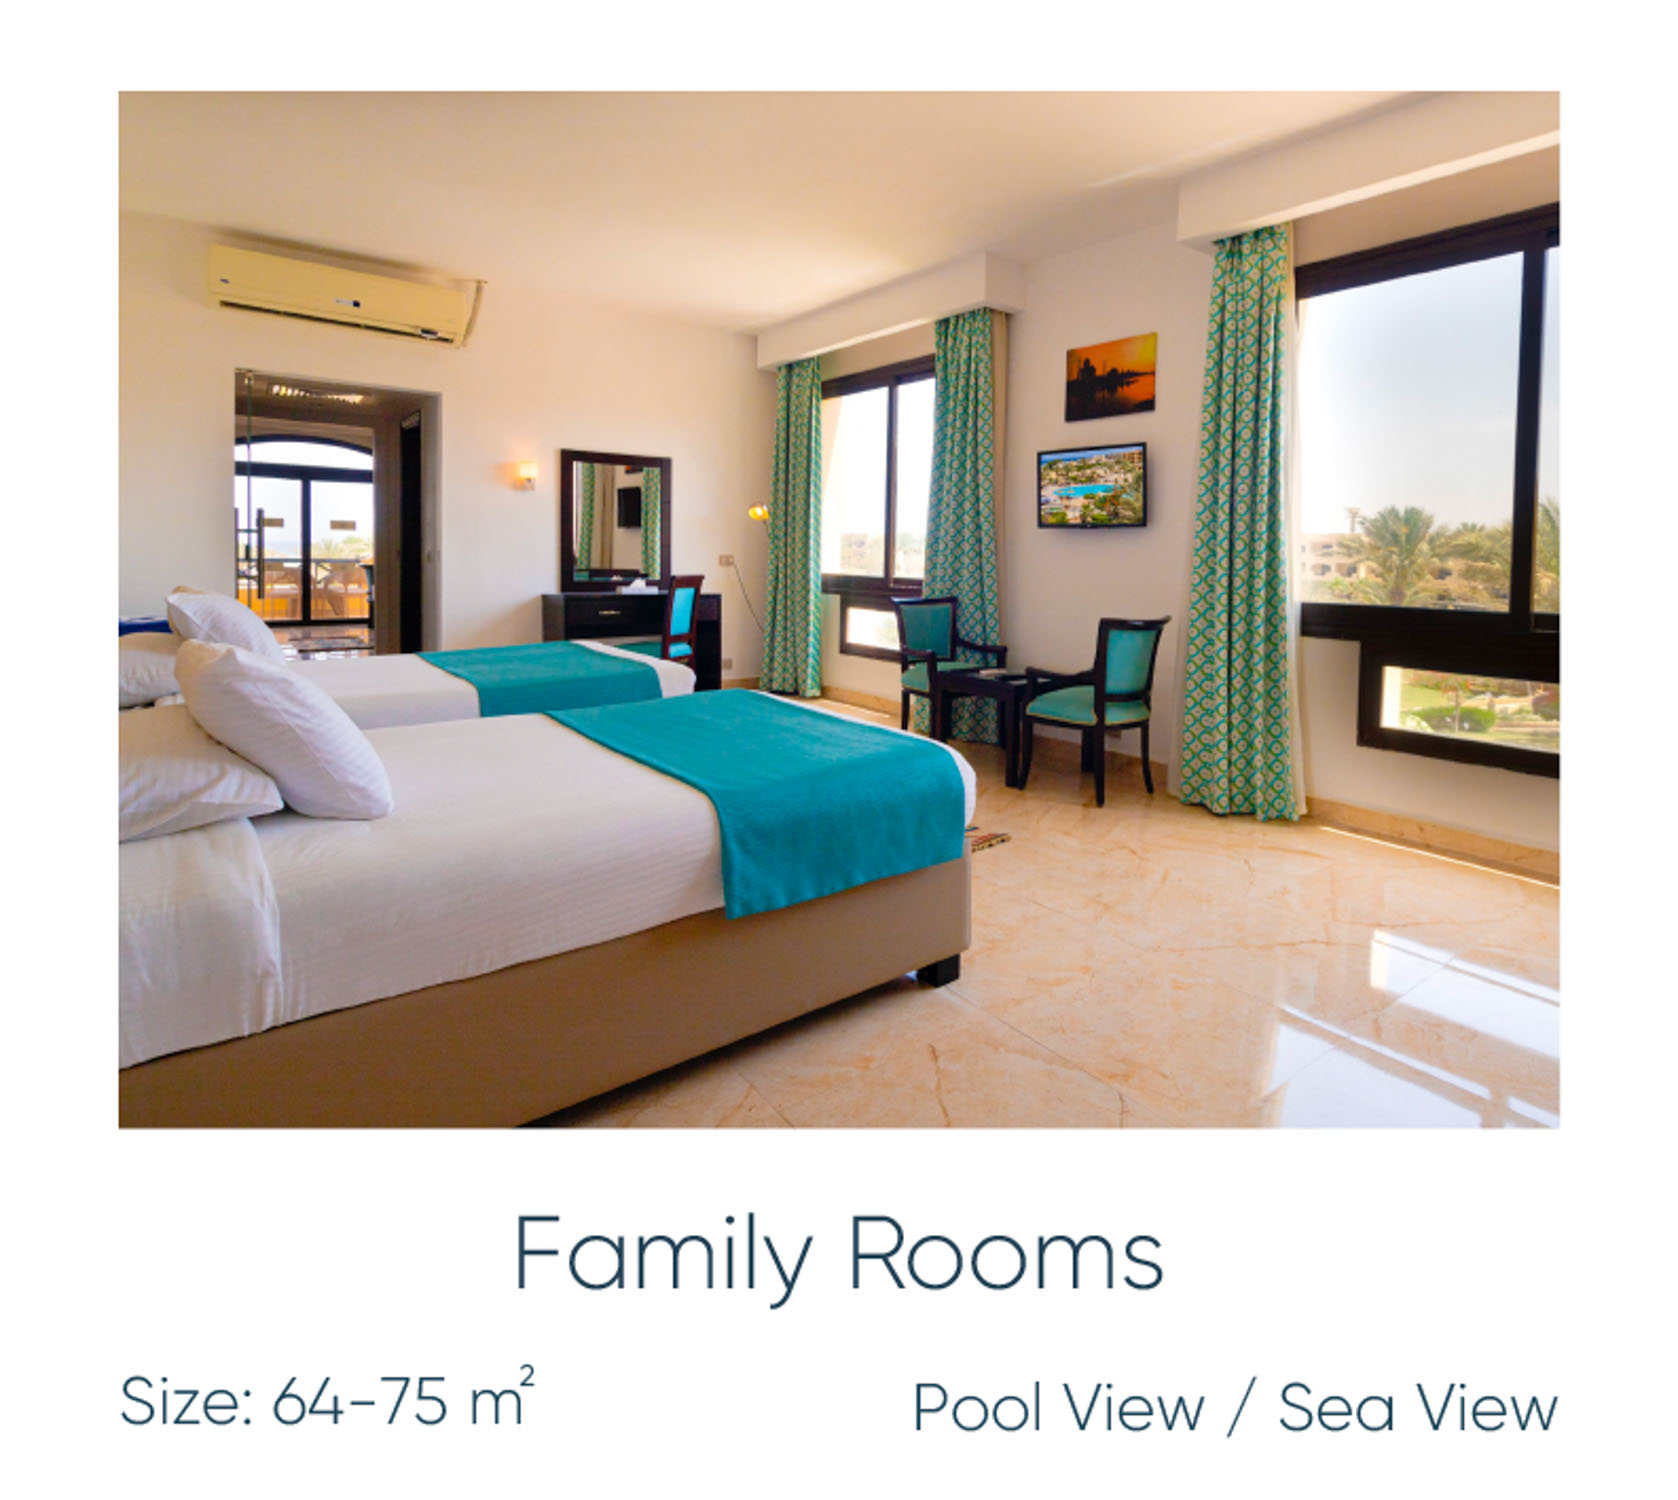 Discover-rooms-family